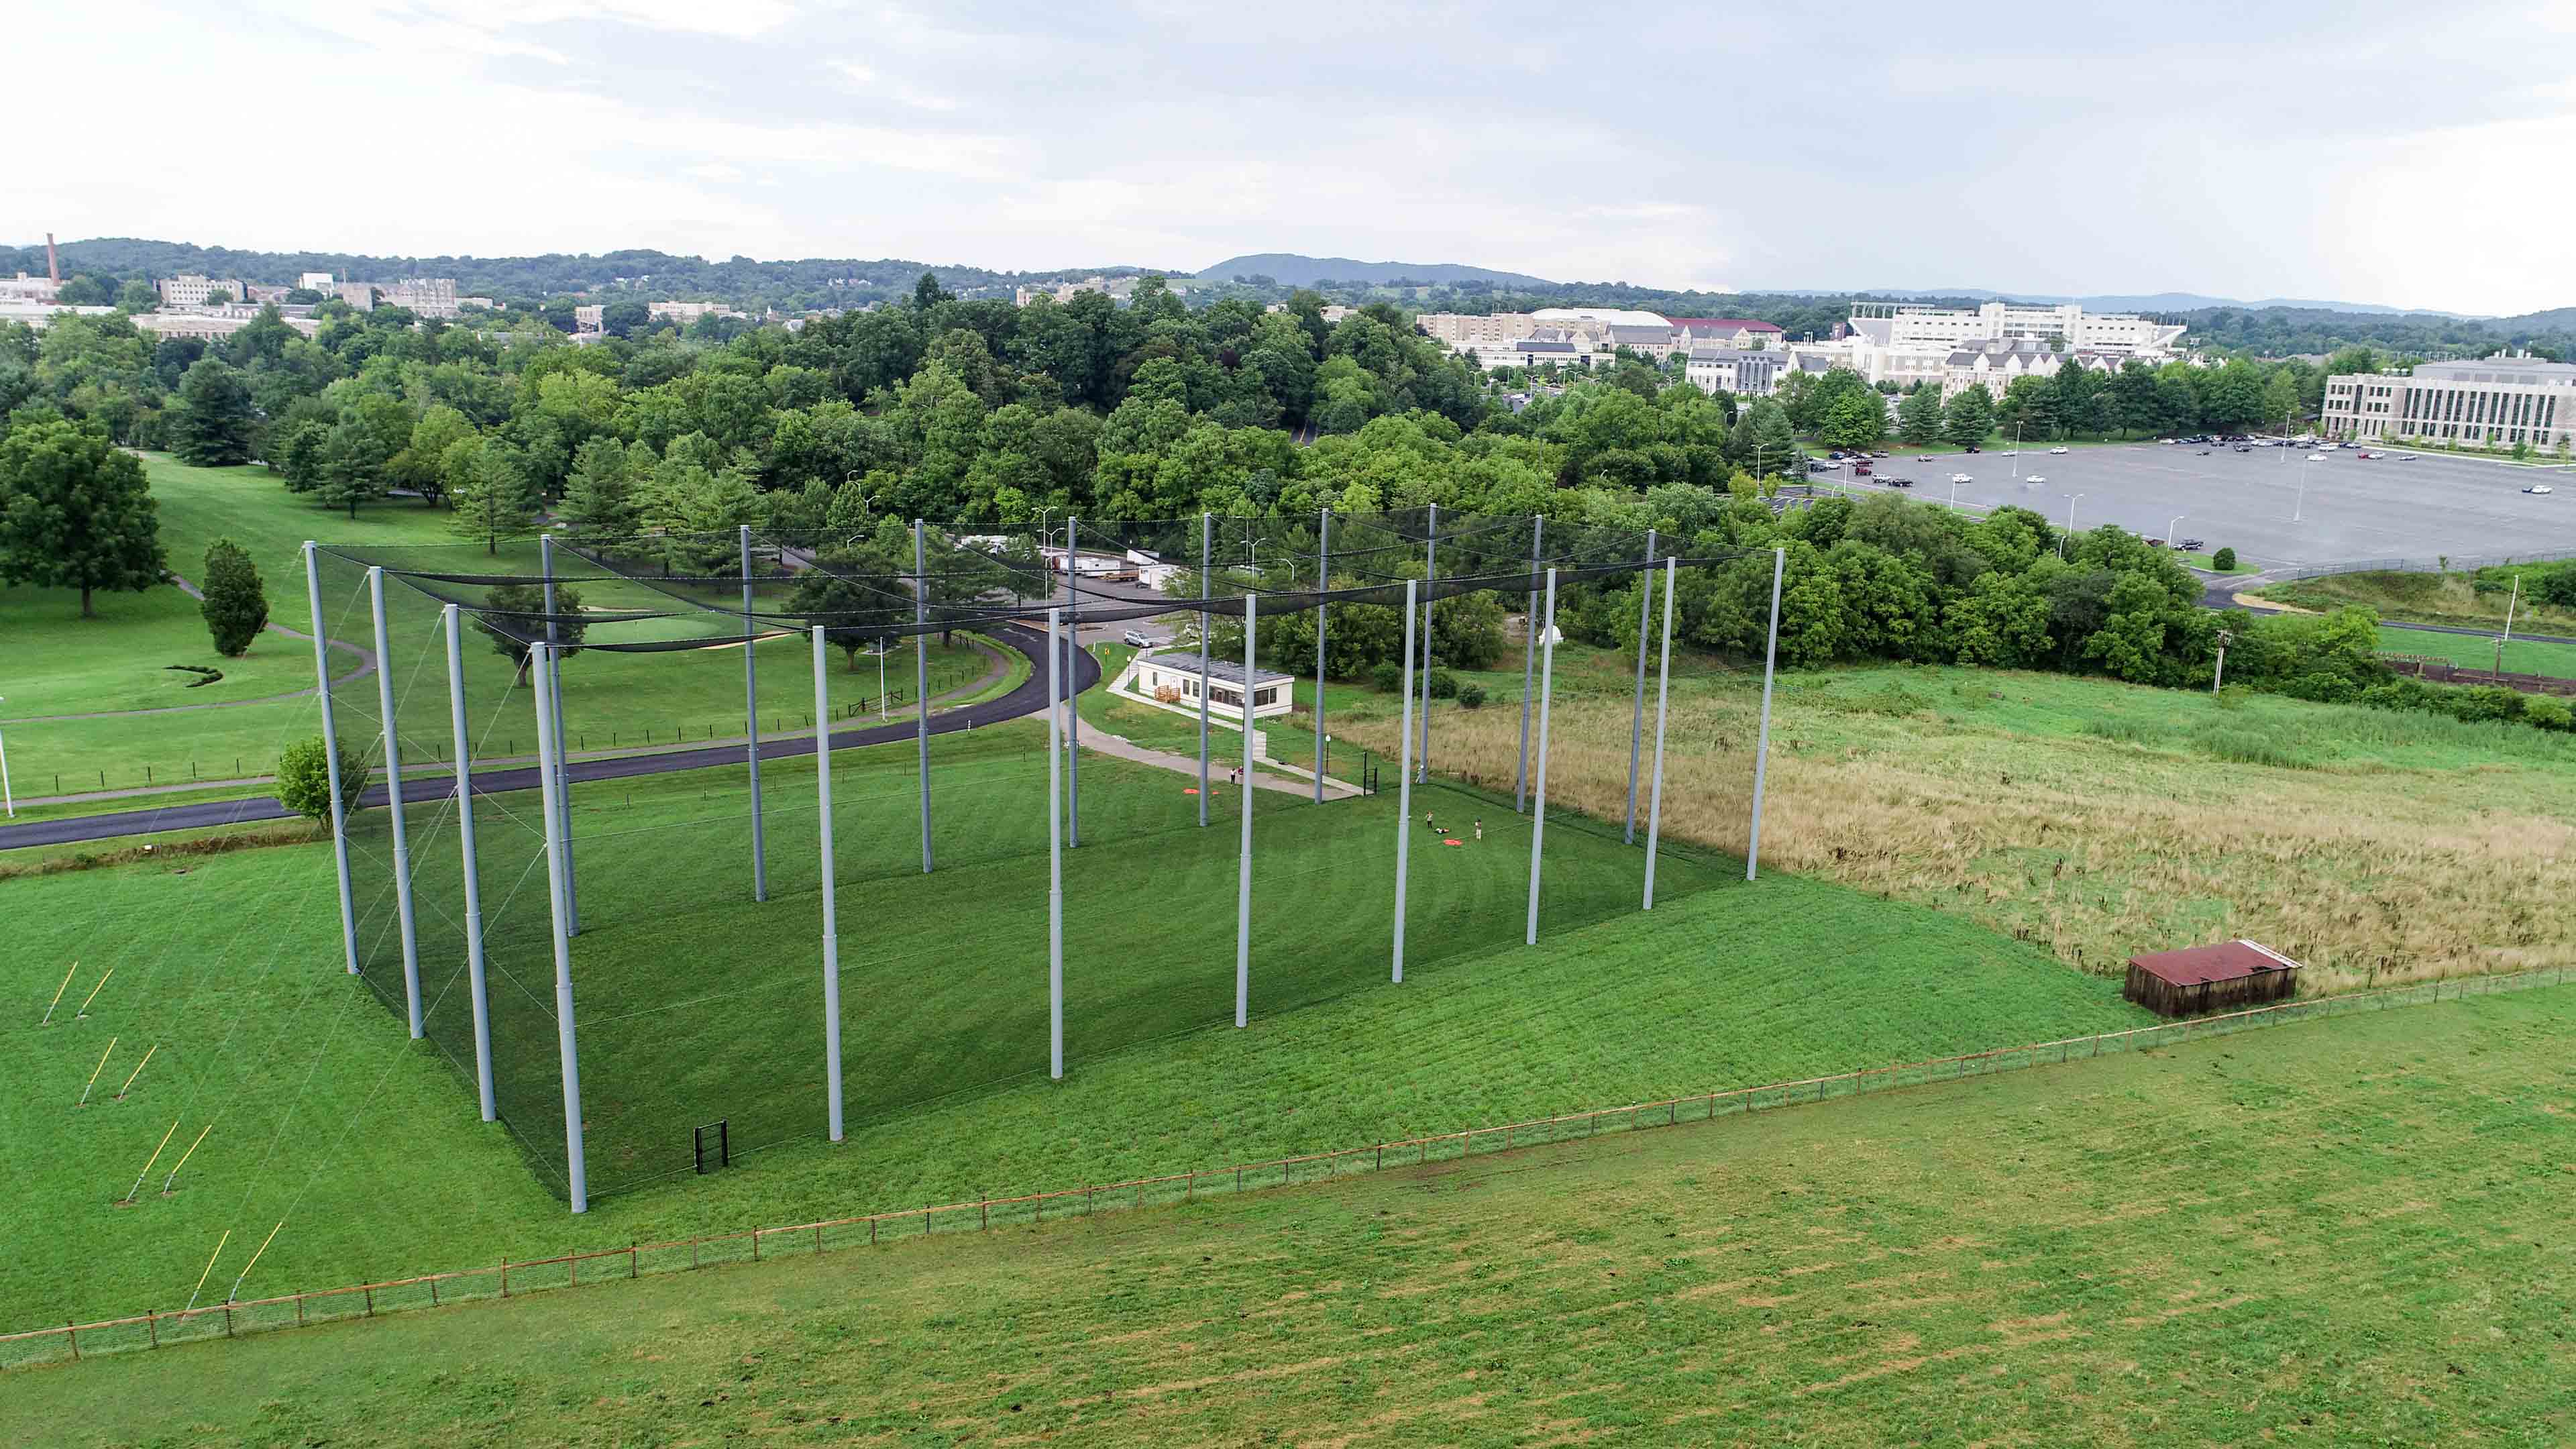 An aerial photo of the drone park with the Virginia Tech campus in the background.